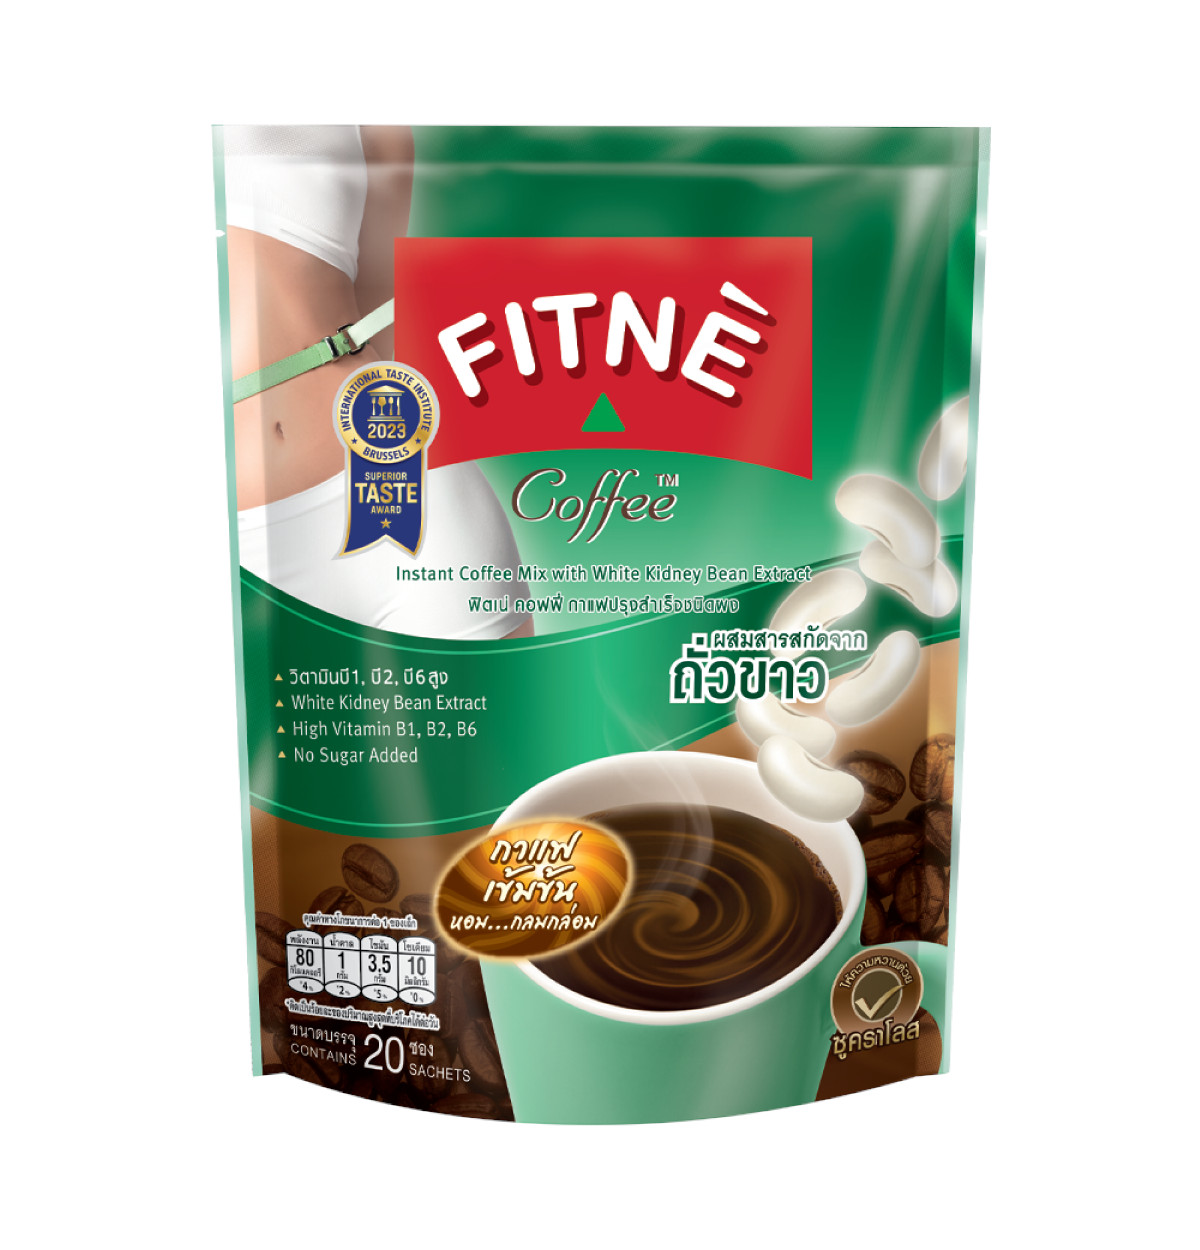 FITNE' Coffee Instant Coffee Mix with White Kidney Bean Extract 15g.x20 Sticks